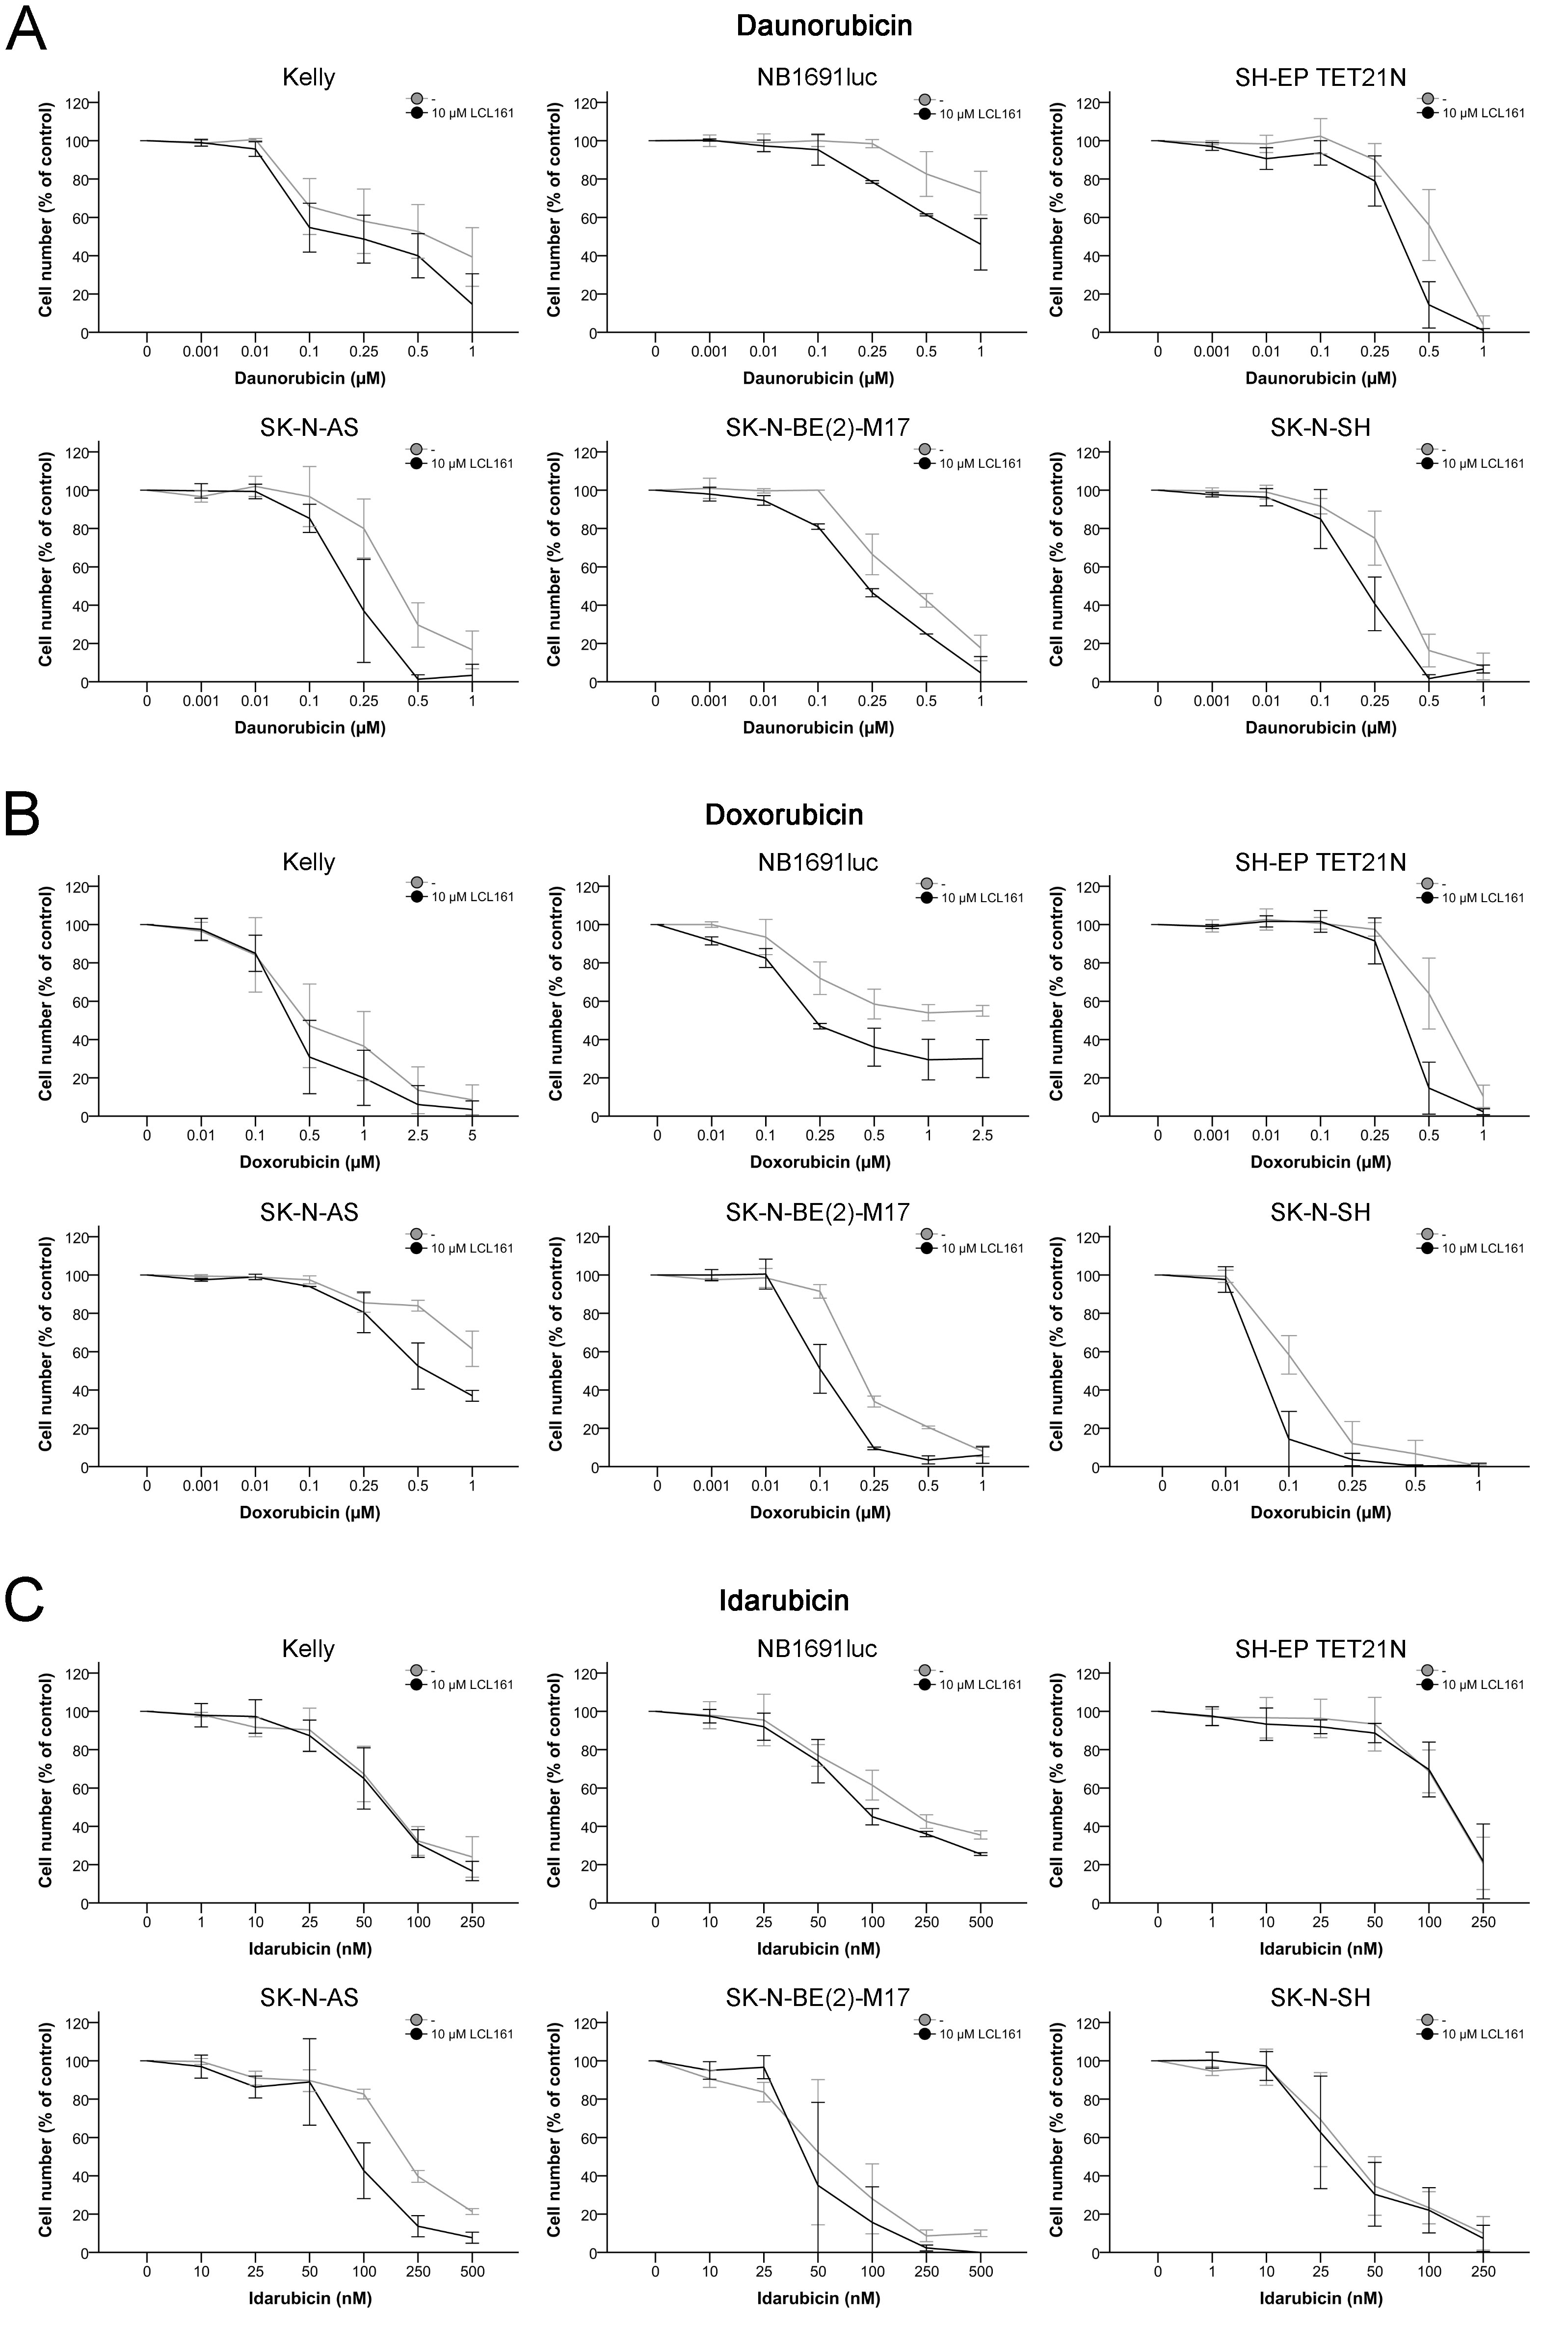 Inhibition of cell proliferation in neuroblastoma cell lines by anthracyclines and their combination with LCL161.